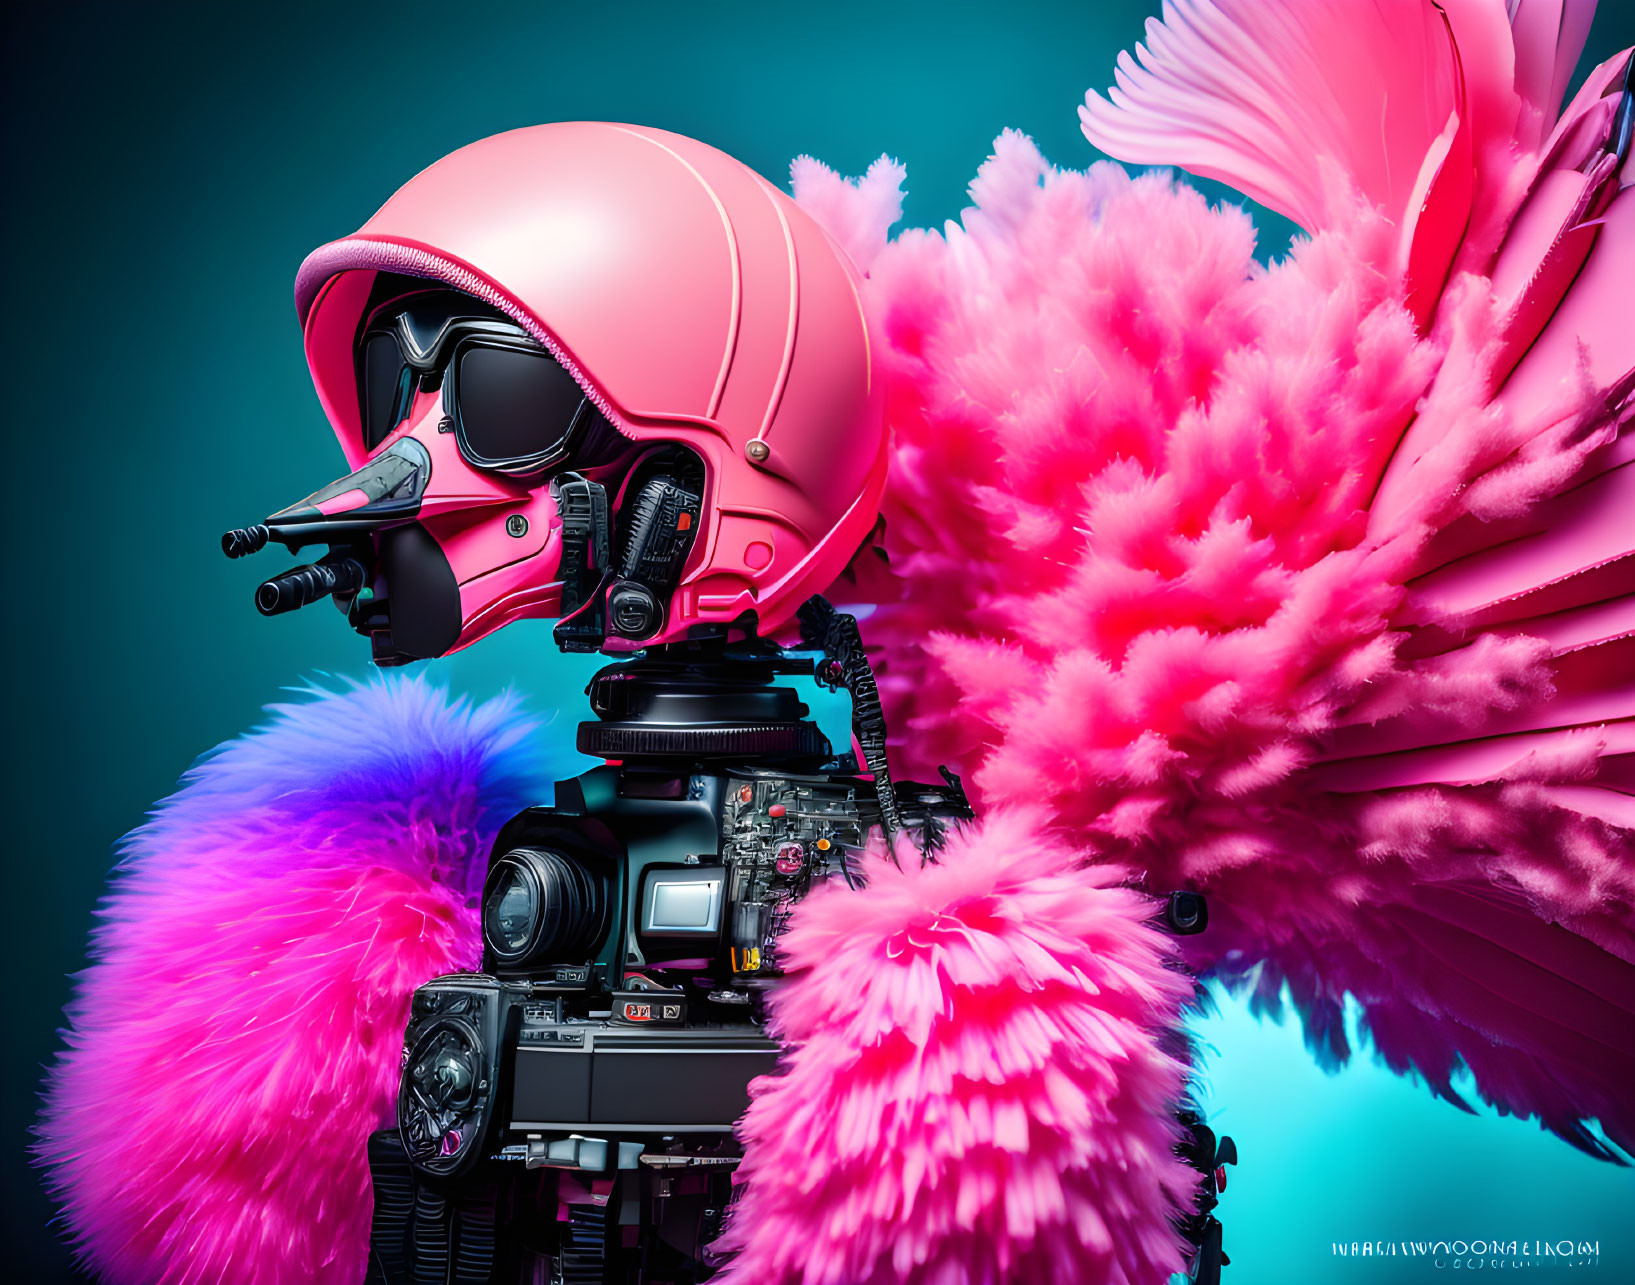 Vintage Camera and Pink Motorcycle Helmet with Feathers on Teal Background